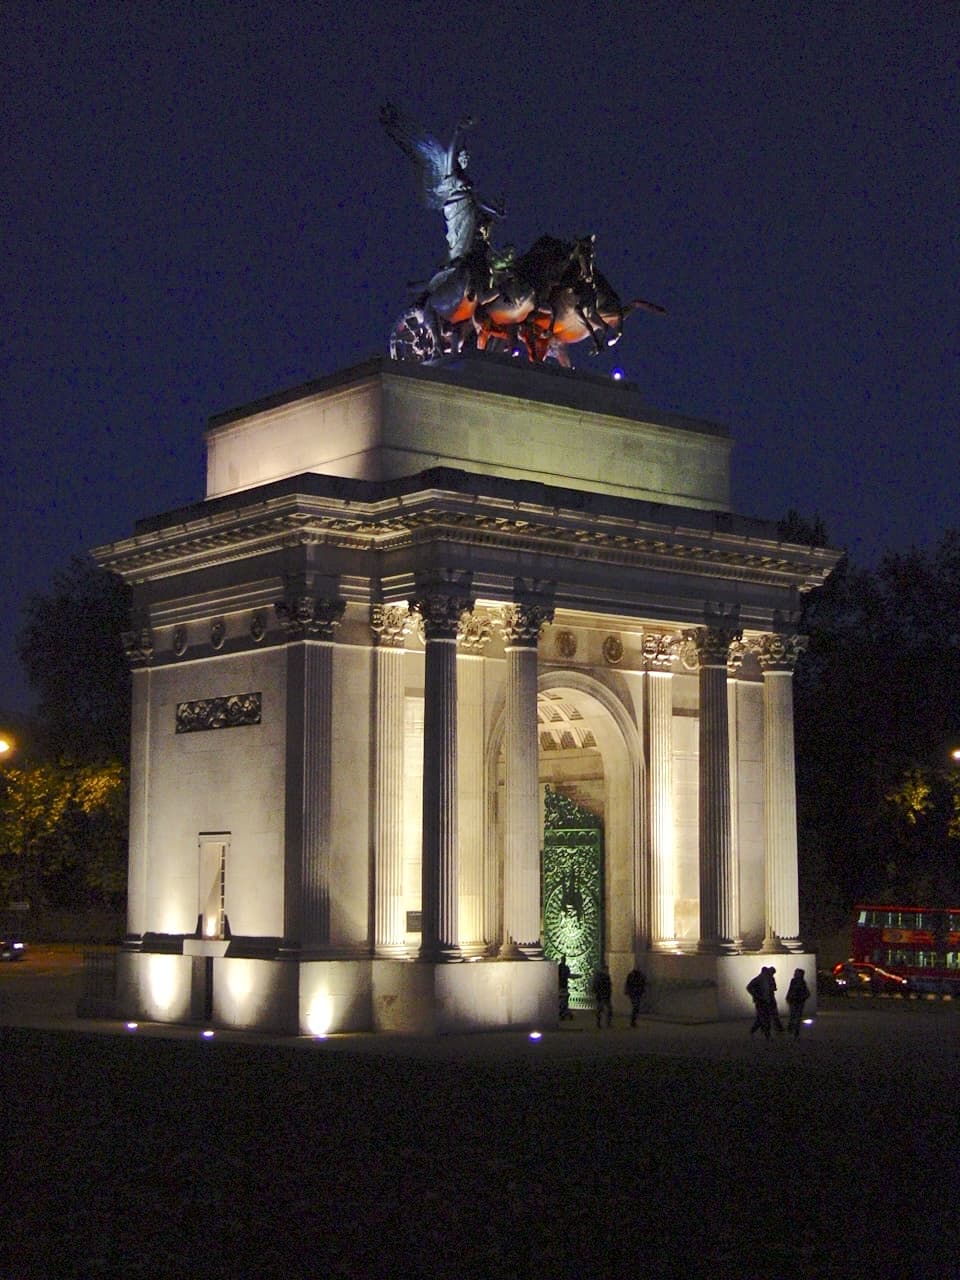 Wellington Arch in Westminster, London, England